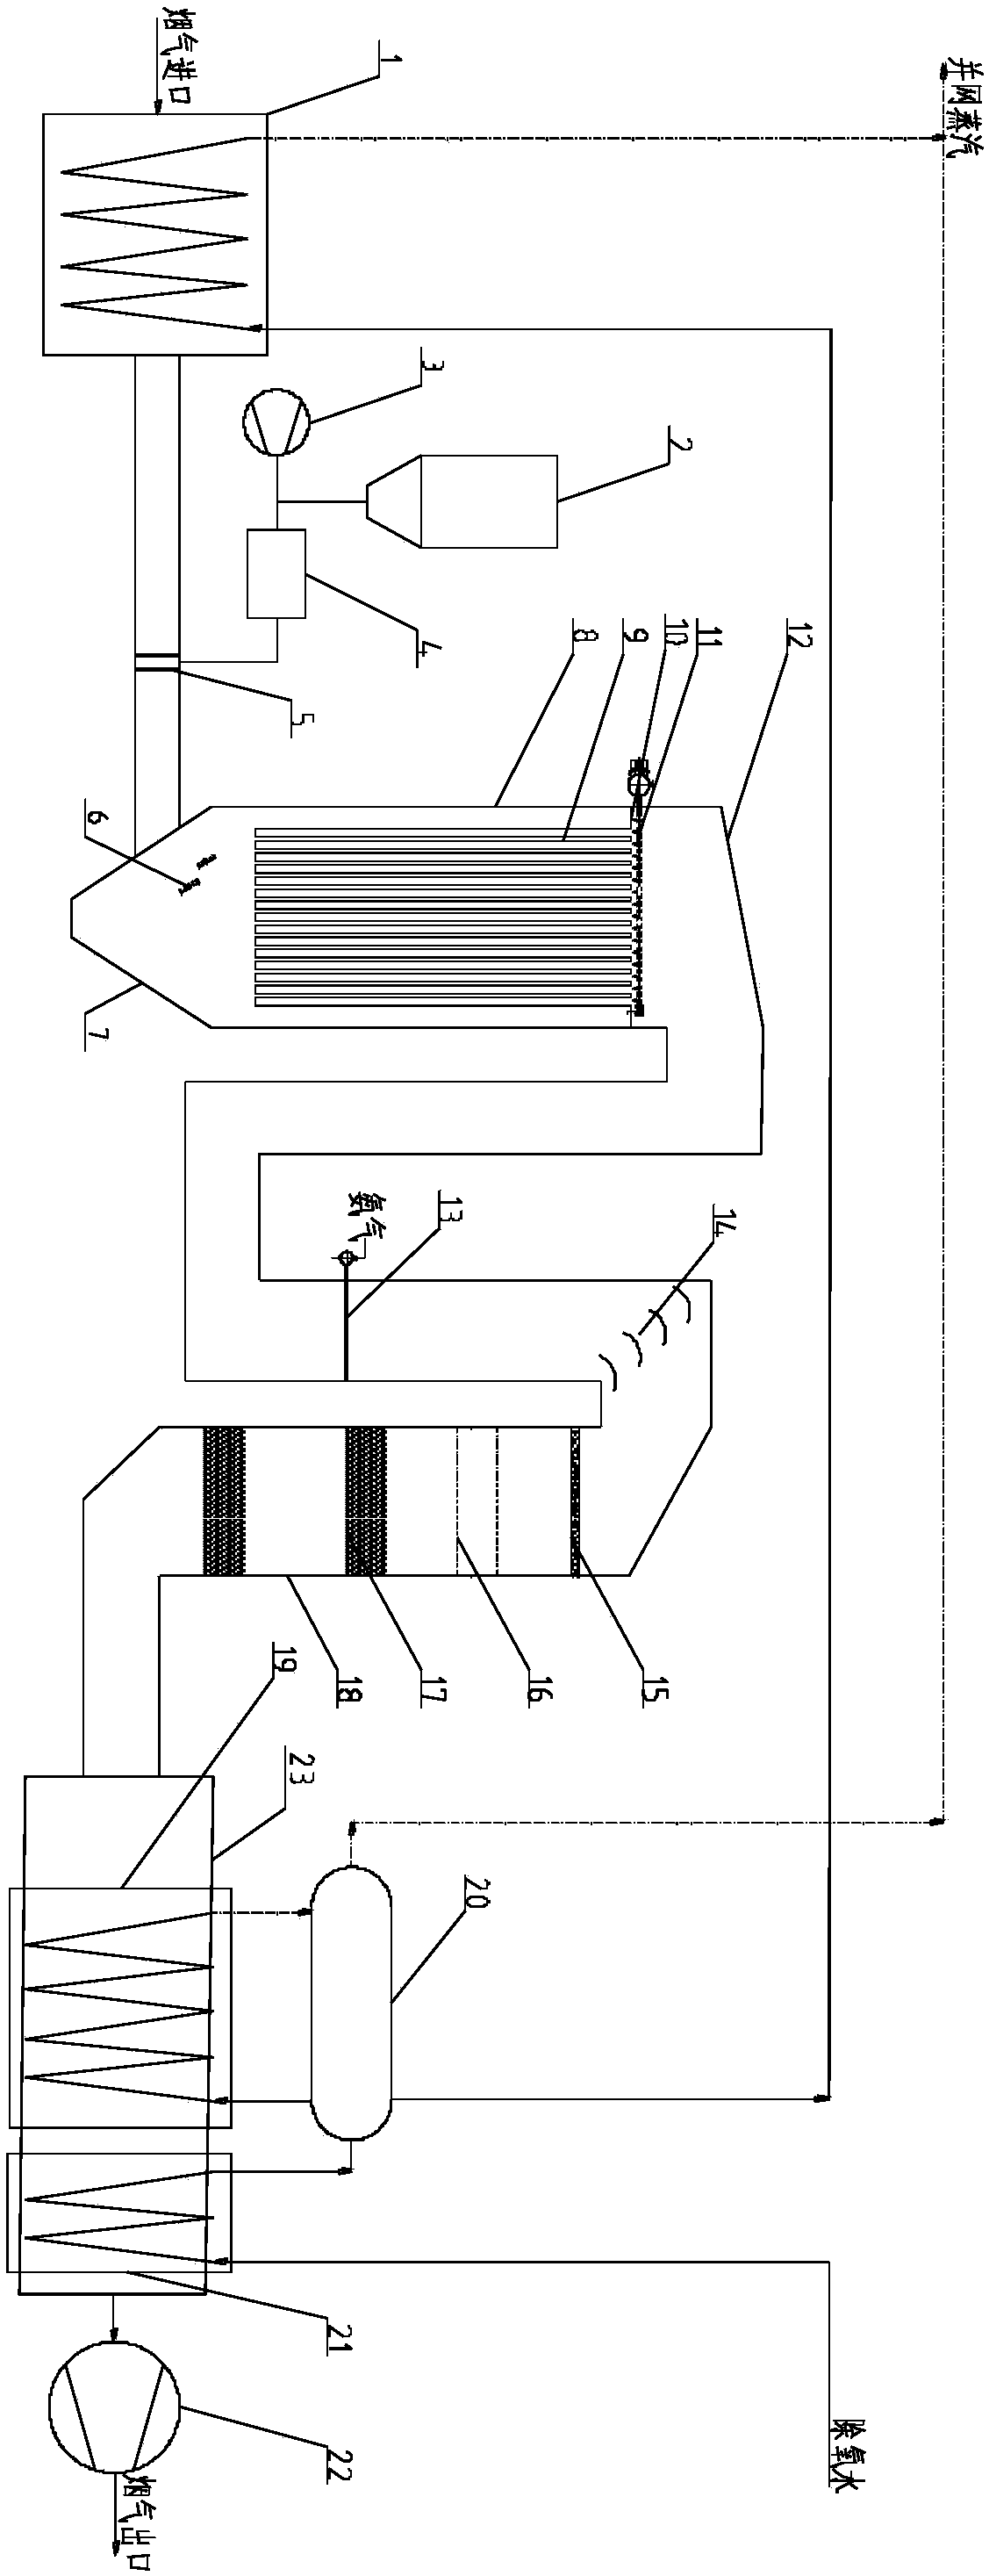 Coke oven flue gas multi-pollutant dry purification device and process